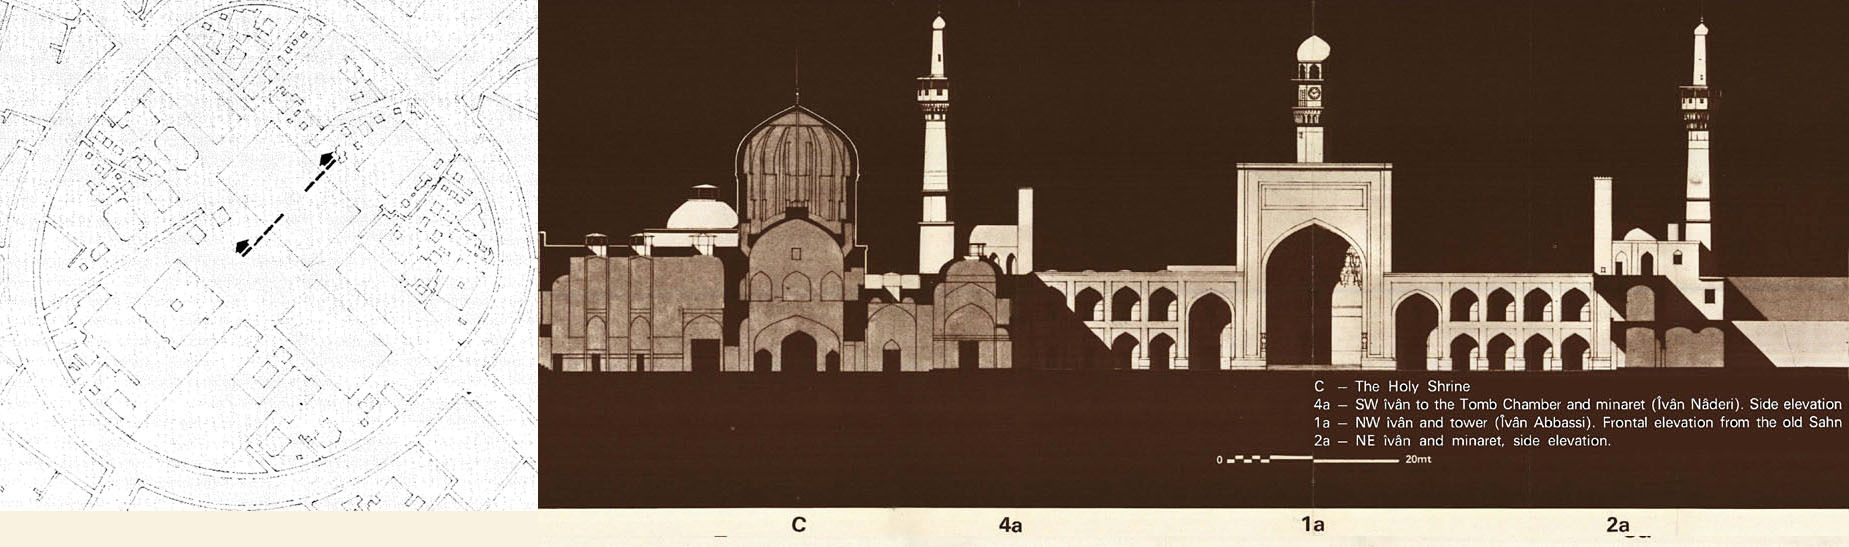 Transverse section through Tomb Chamber, showing from left to right: Holy Shrine (C); side elevation of the SW iwan to the Tomb Chamber and minaret (or, Iwan Naderi, 4a); Frontal elevation from the old courtyard of the NW iwan and tower (or, Iwan Abbasi, 1a); NE iwan and minaret, side elevation (2a)